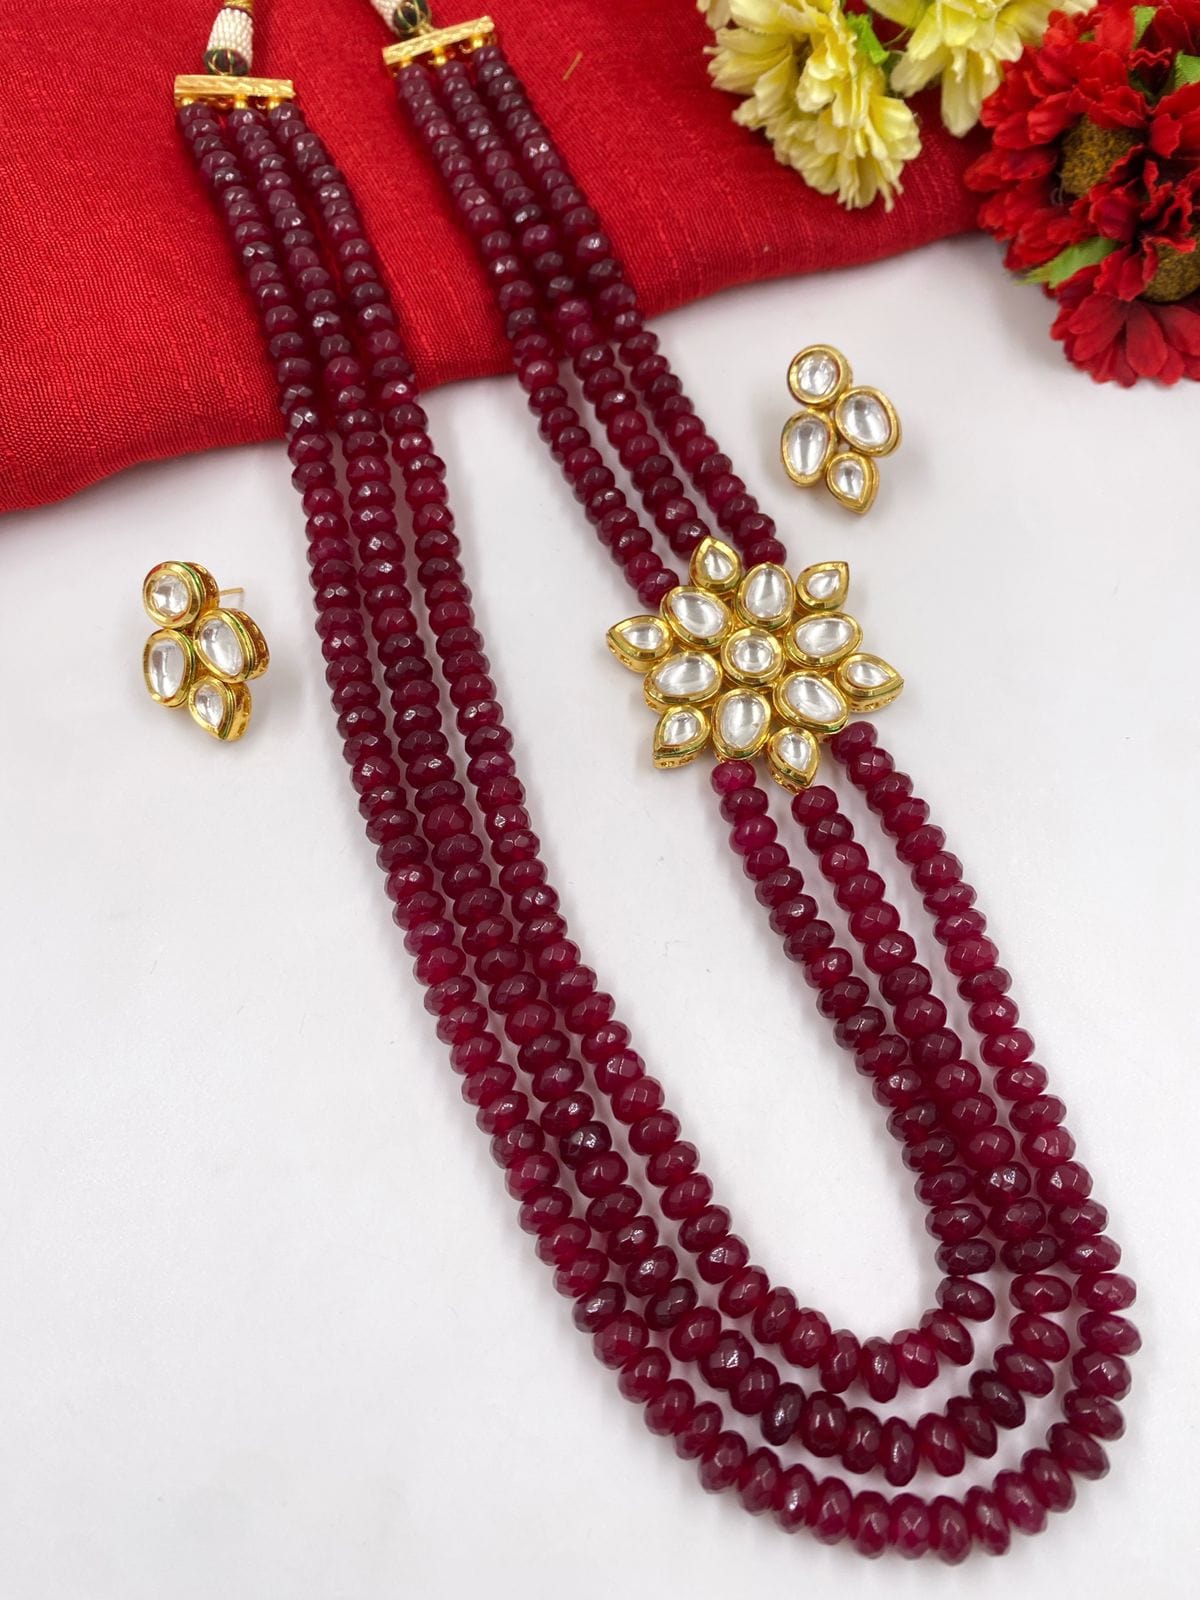 Designer Kundan Brooch And Red Jade Stone Beads Necklace For Women By Gehna Shop Beads Jewellery